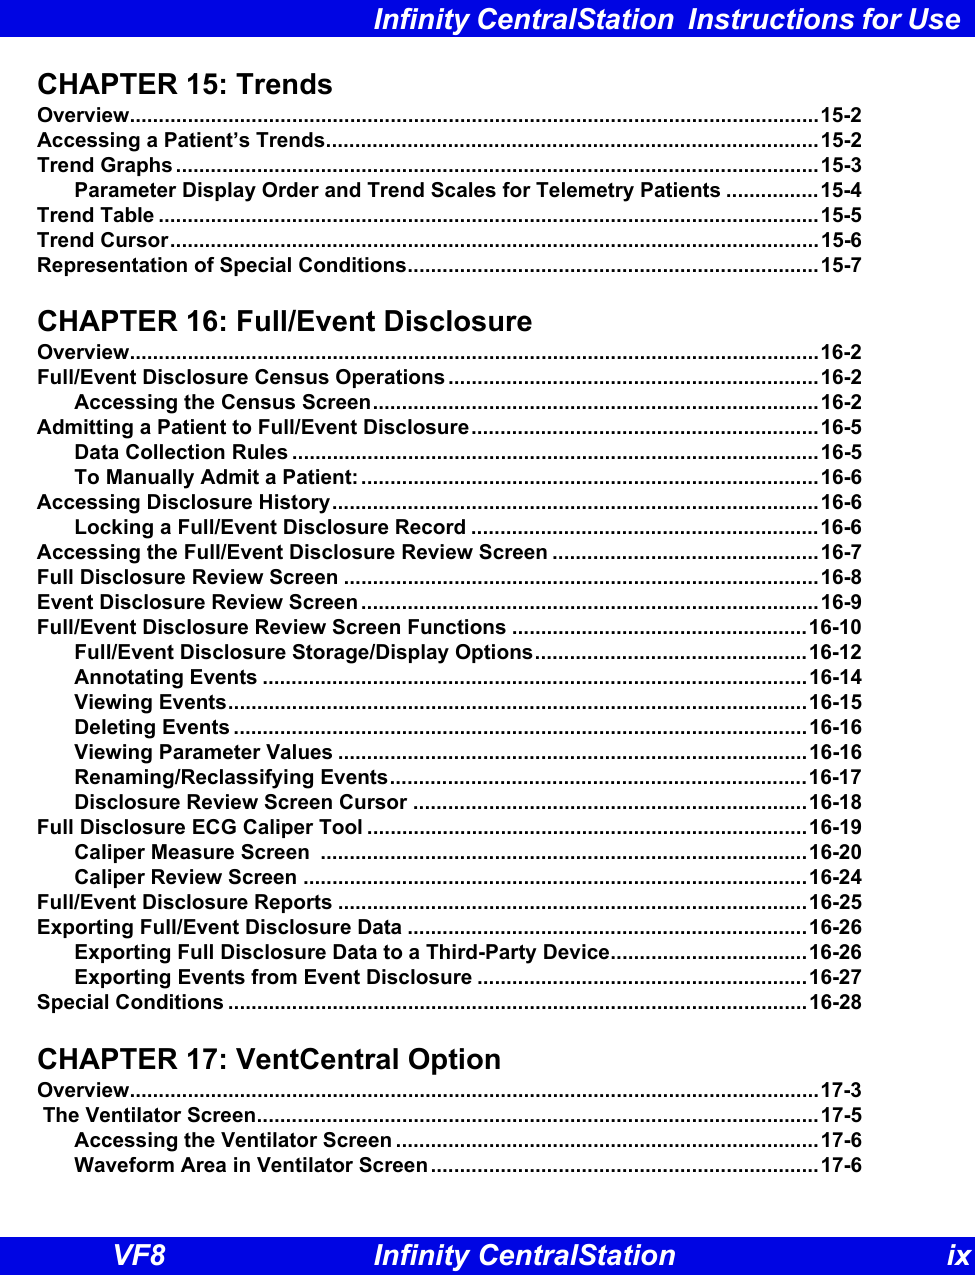 Infinity CentralStation  Instructions for Use VF8 Infinity CentralStation ixCHAPTER 15: TrendsOverview.......................................................................................................................15-2Accessing a Patient’s Trends.....................................................................................15-2Trend Graphs ...............................................................................................................15-3Parameter Display Order and Trend Scales for Telemetry Patients ................15-4Trend Table ..................................................................................................................15-5Trend Cursor................................................................................................................15-6Representation of Special Conditions.......................................................................15-7CHAPTER 16: Full/Event DisclosureOverview.......................................................................................................................16-2Full/Event Disclosure Census Operations ................................................................16-2Accessing the Census Screen.............................................................................16-2Admitting a Patient to Full/Event Disclosure............................................................16-5Data Collection Rules ...........................................................................................16-5To Manually Admit a Patient:...............................................................................16-6Accessing Disclosure History....................................................................................16-6Locking a Full/Event Disclosure Record ............................................................16-6Accessing the Full/Event Disclosure Review Screen ..............................................16-7Full Disclosure Review Screen ..................................................................................16-8Event Disclosure Review Screen ...............................................................................16-9Full/Event Disclosure Review Screen Functions ...................................................16-10Full/Event Disclosure Storage/Display Options...............................................16-12Annotating Events ..............................................................................................16-14Viewing Events....................................................................................................16-15Deleting Events ...................................................................................................16-16Viewing Parameter Values .................................................................................16-16Renaming/Reclassifying Events........................................................................16-17Disclosure Review Screen Cursor ....................................................................16-18Full Disclosure ECG Caliper Tool ............................................................................16-19Caliper Measure Screen  ....................................................................................16-20Caliper Review Screen .......................................................................................16-24Full/Event Disclosure Reports .................................................................................16-25Exporting Full/Event Disclosure Data .....................................................................16-26Exporting Full Disclosure Data to a Third-Party Device..................................16-26Exporting Events from Event Disclosure .........................................................16-27Special Conditions ....................................................................................................16-28CHAPTER 17: VentCentral OptionOverview.......................................................................................................................17-3 The Ventilator Screen.................................................................................................17-5Accessing the Ventilator Screen .........................................................................17-6Waveform Area in Ventilator Screen...................................................................17-6